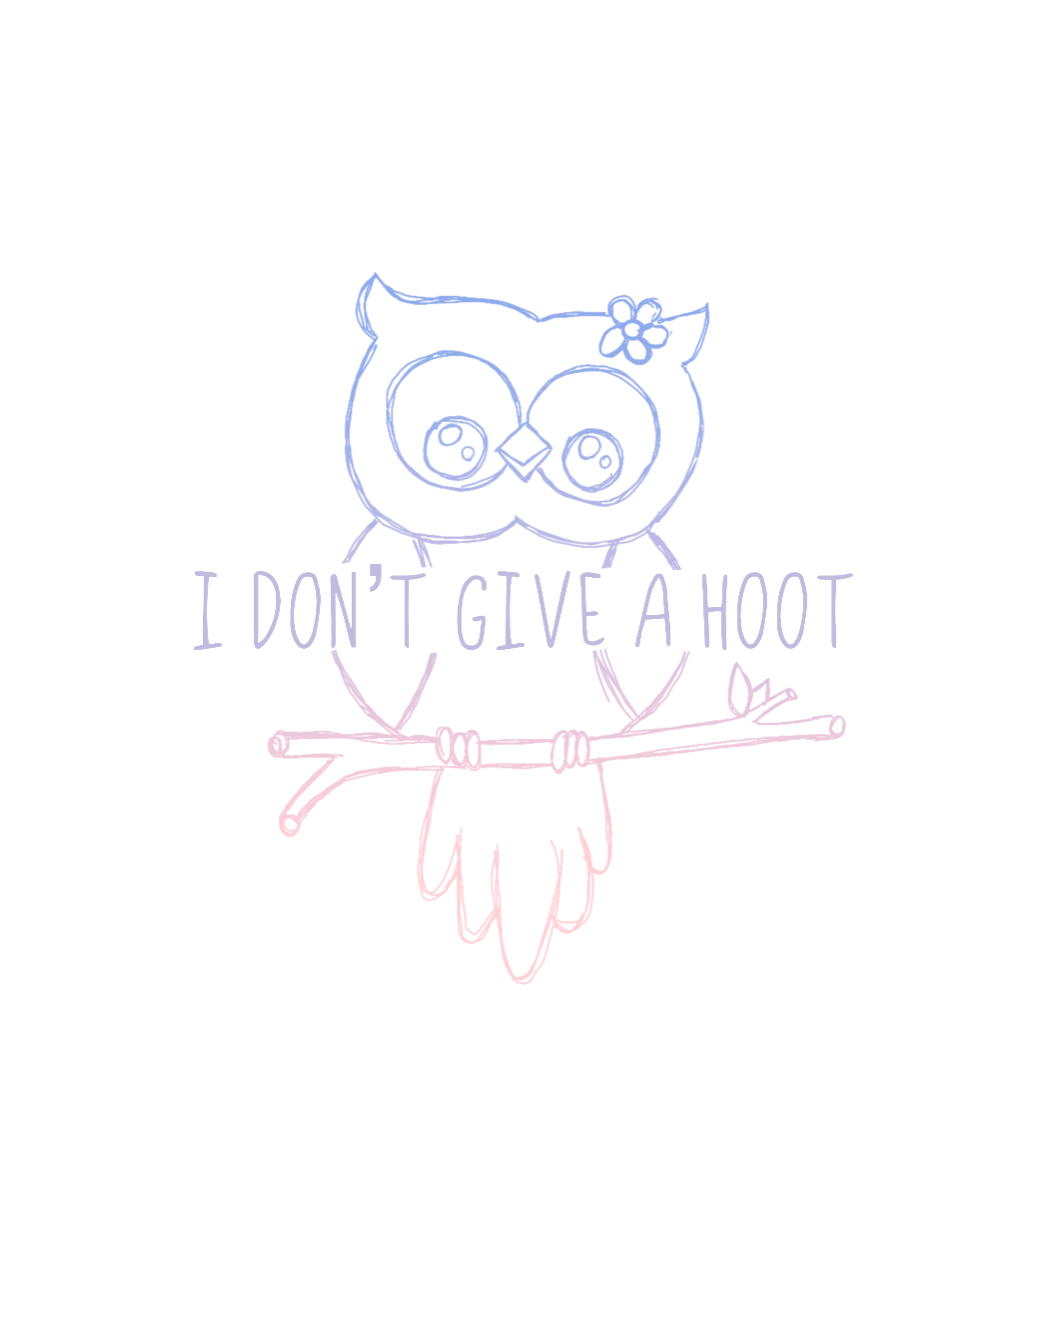 I Don't Give a Hoot! This funny hoodie sweatshirt is a great way to show your personal sense of humor and your love for cute owls! Also makes a perfect gift for that punny friend in your life!